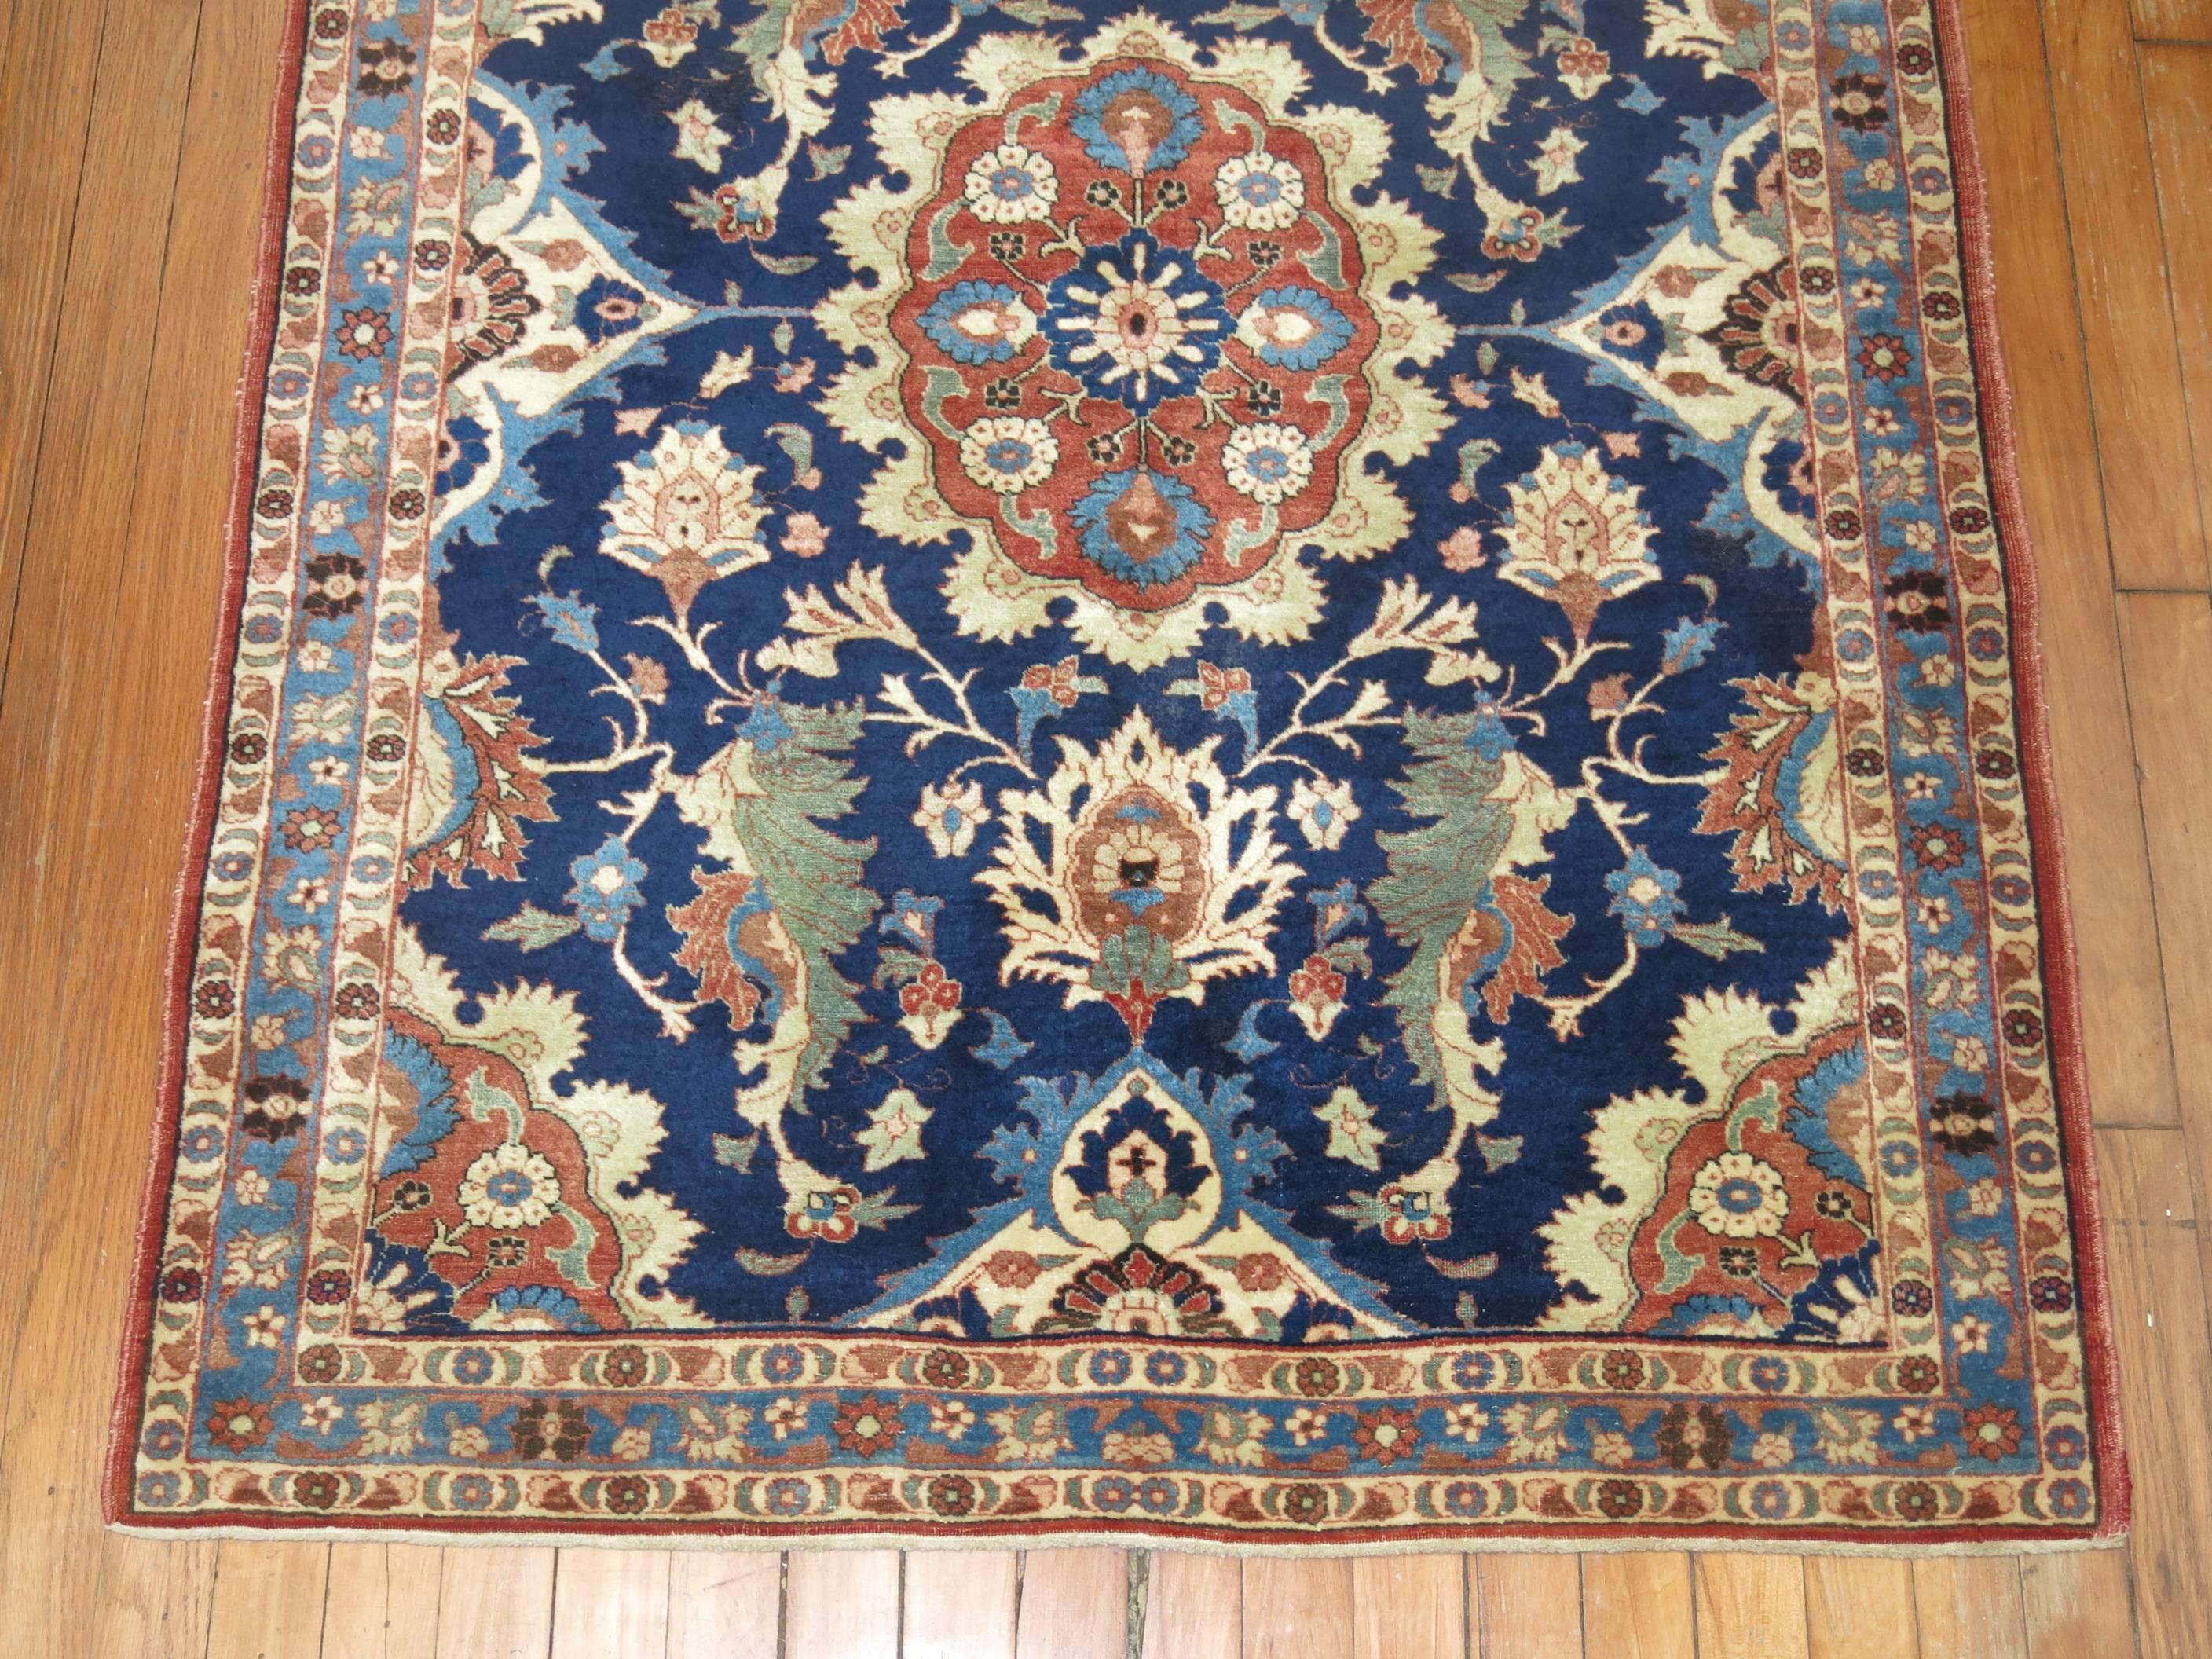 Lovely early 20th century Persian Isfahan carpet with a navy blue field, accents in green and brown. Exceptional quality and even nicer looking in person.

3'6'' x 4'9''